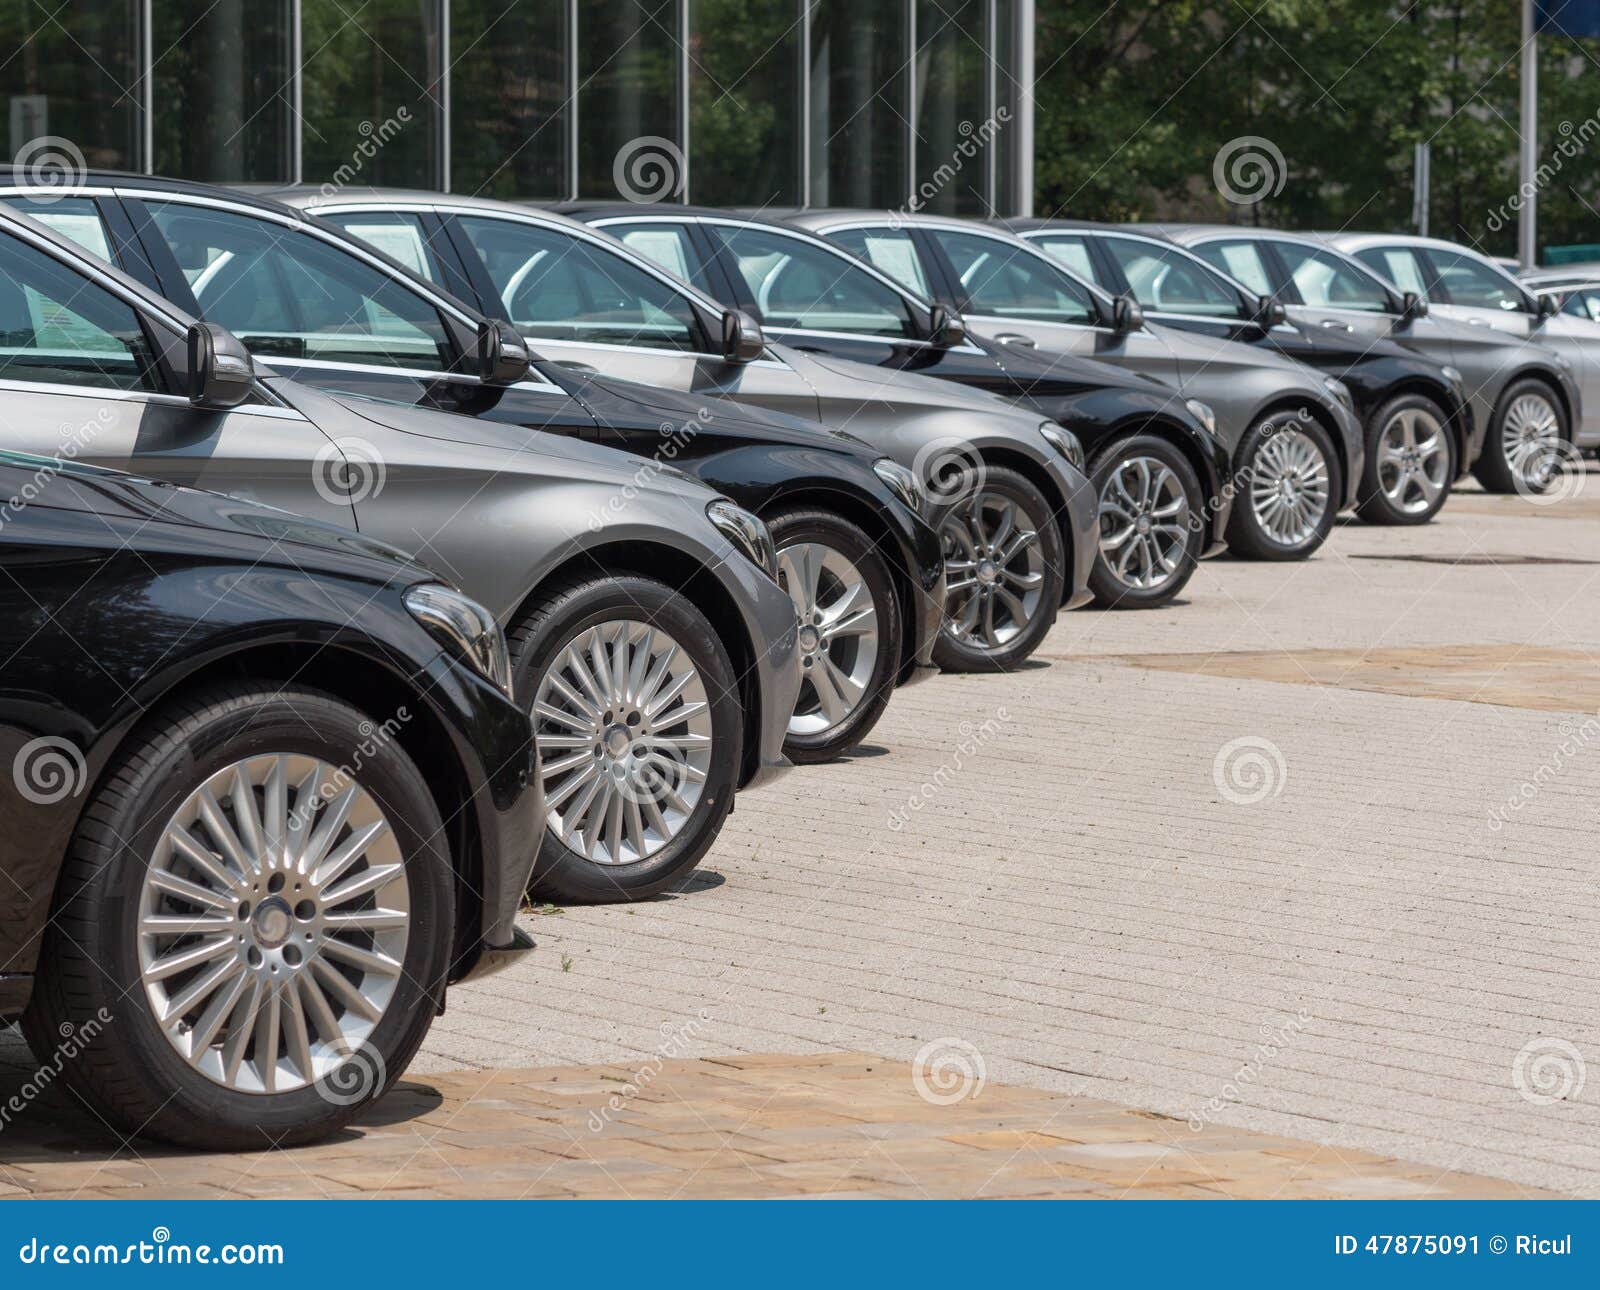 Used cars for sale stock image. Image of vehicle, germany - 47875091